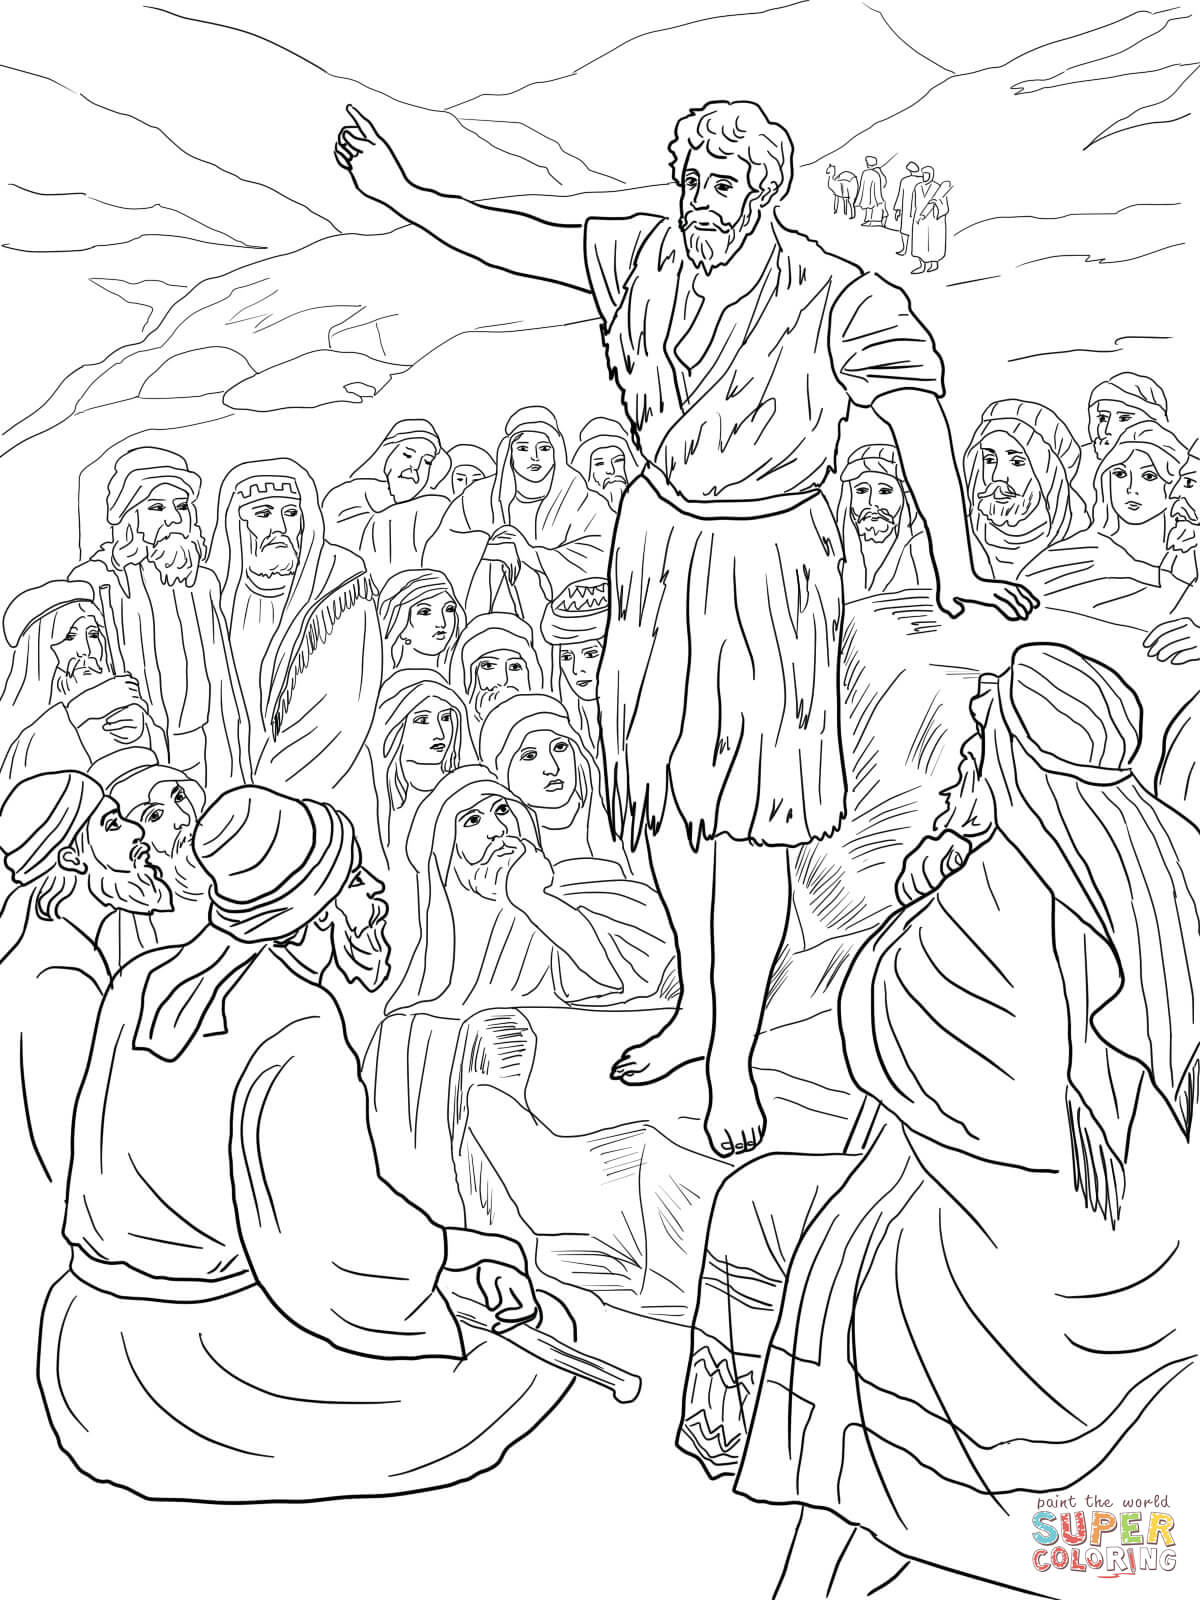 Zechariah, Elizabeth and Baby John the Baptist coloring page